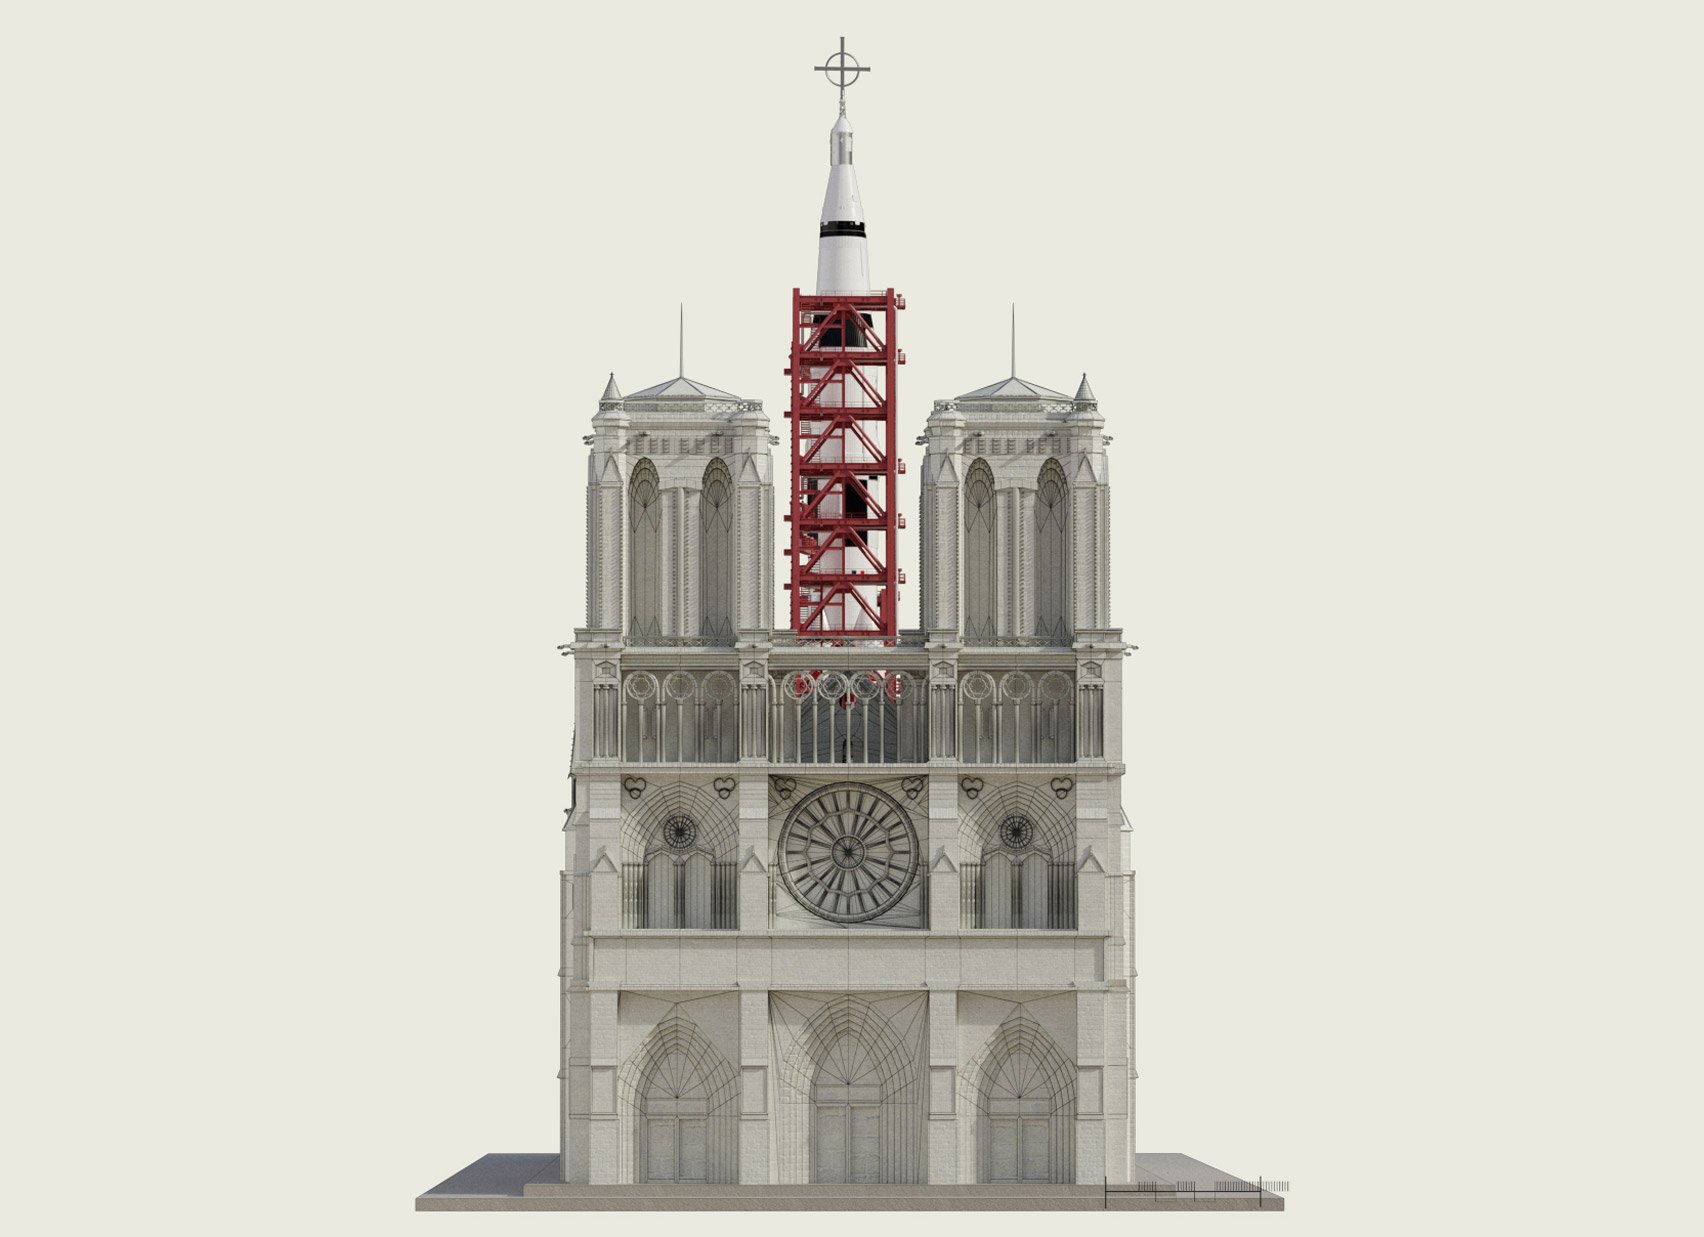 Designer Sebastian Errazuriz has designed a space rocket launch pad for Notre-Dame in an "act of creative one-upmanship" to demand an end to architects' proposals.